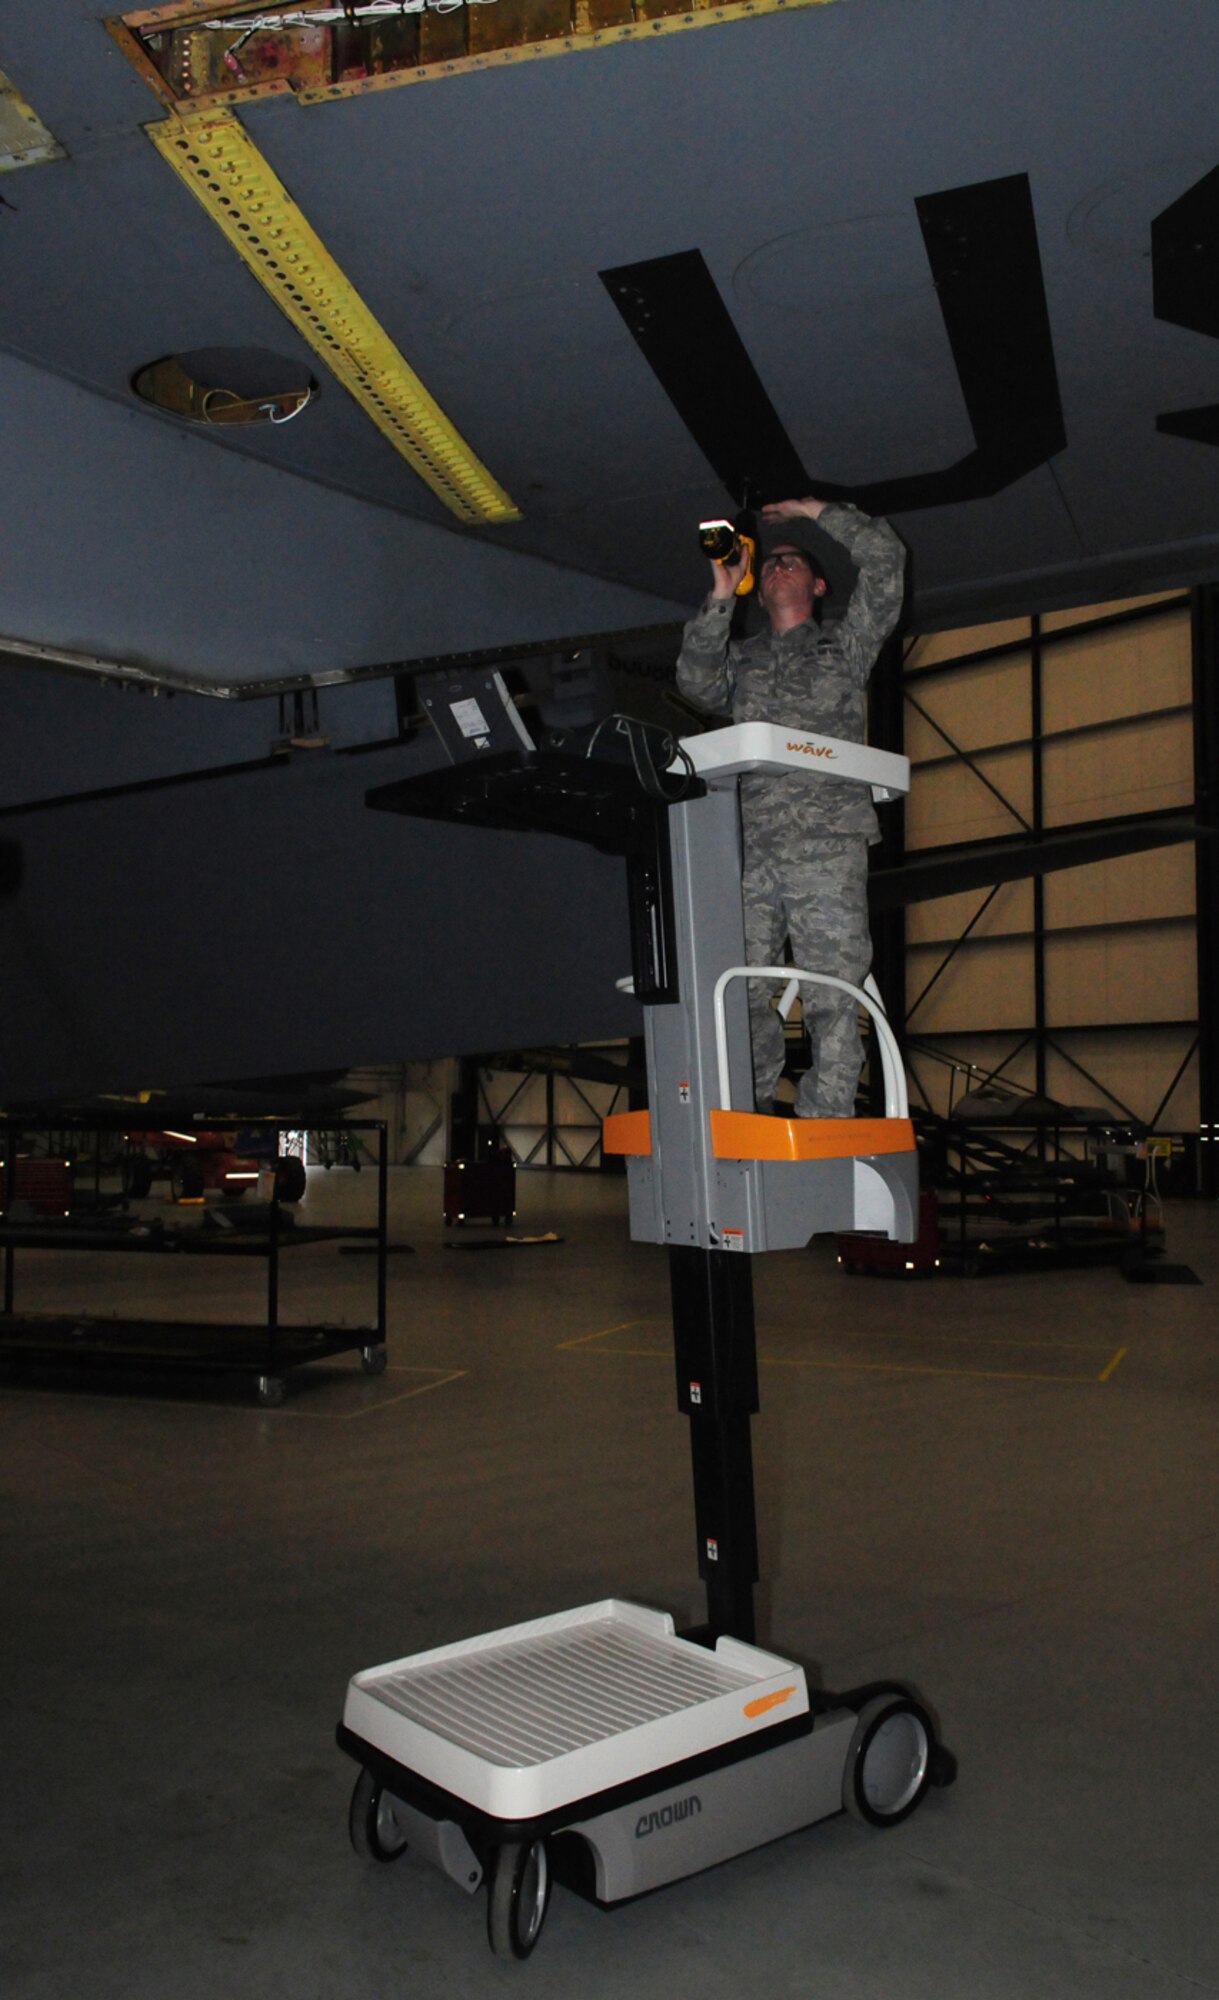 Staff Sgt. Christopher Klaus, 100th Maintenance Squadron ISO dock controller, uses a new mobile maintenance stand, purchased as part of an Air Force Smart Operations for the 21st Century project, to install the lower aileron lockout access panel on the left wing of a KC-135 Stratotanker Dec. 9, 2009. December 9 was a repanel day, when 11 ISO dock members took part in installing 250 panels, prior to the aircraft removal from the hangar for engine runs. The mobile stands, used in-place of the old wing stands, cost the Air Force about $100,000 for seven stands. The stands have already saved more than 600 man-hours and hundreds of thousands of dollars. (U.S. Air Force photo/Karen Abeyasekere)